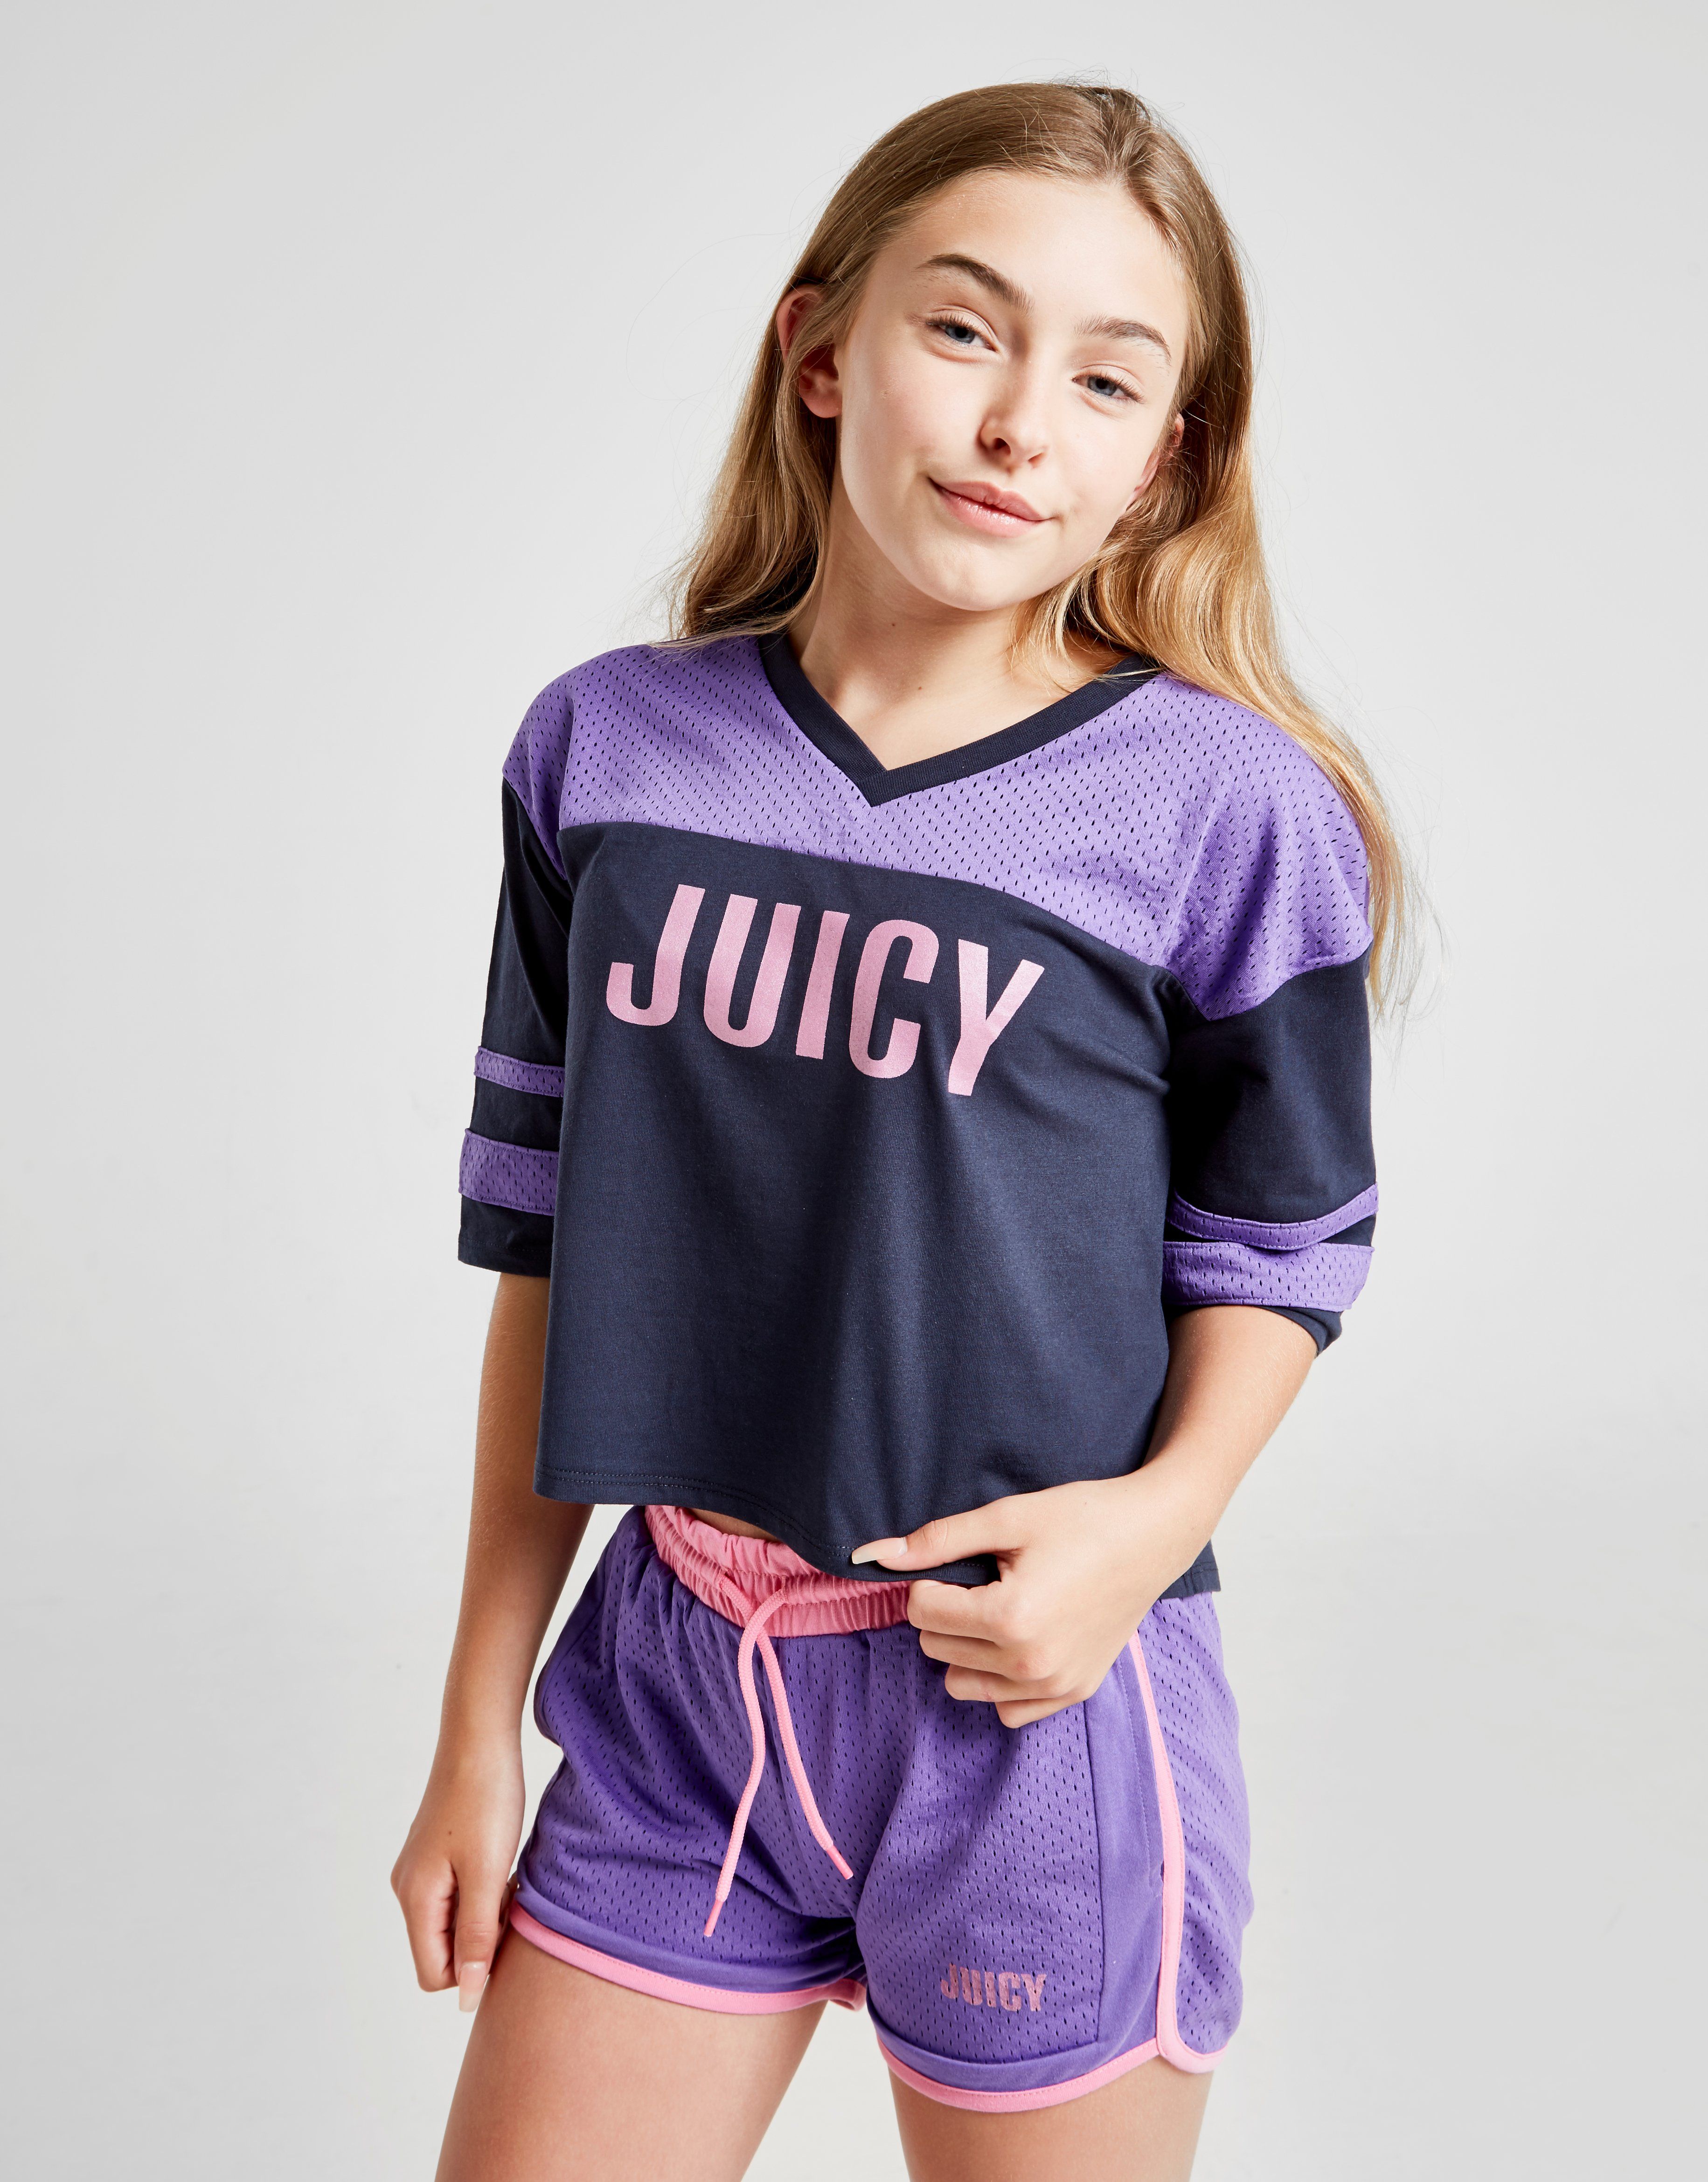 Juicy by Juicy Couture